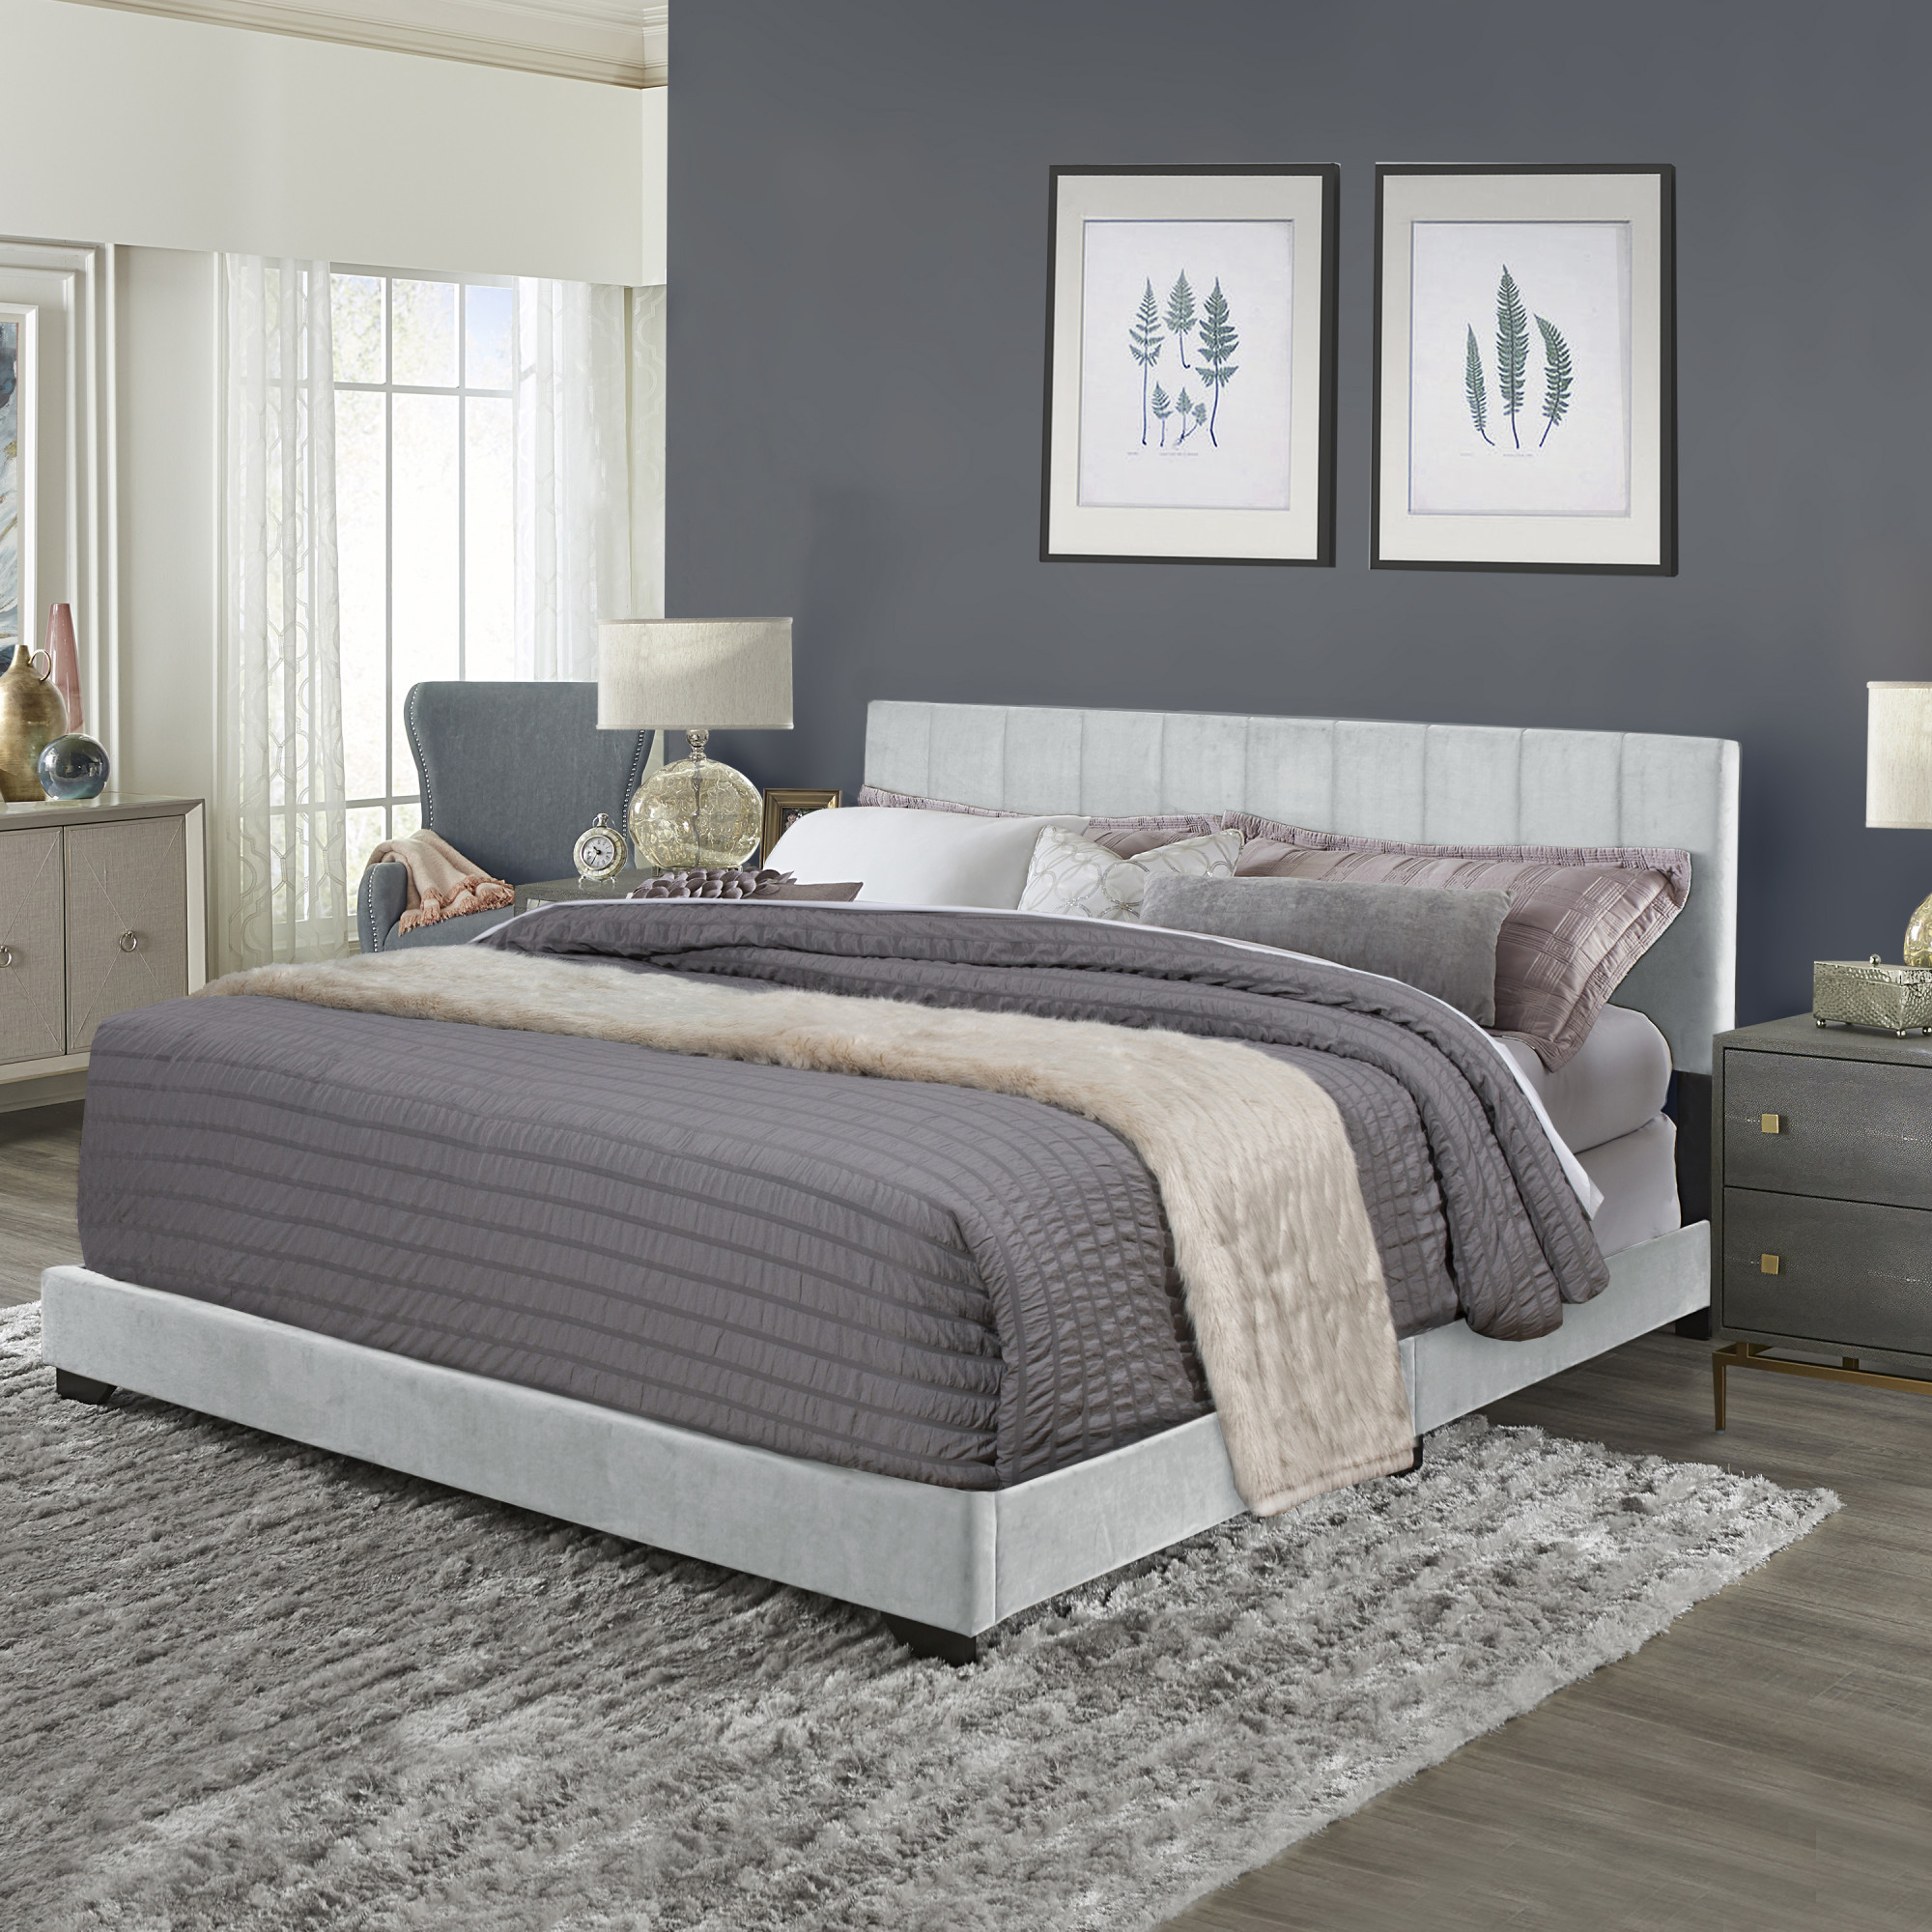 Reece Channel Stitched Upholstered King Bed, Platinum Grey, by Hillsdale Living Essentials - image 1 of 15